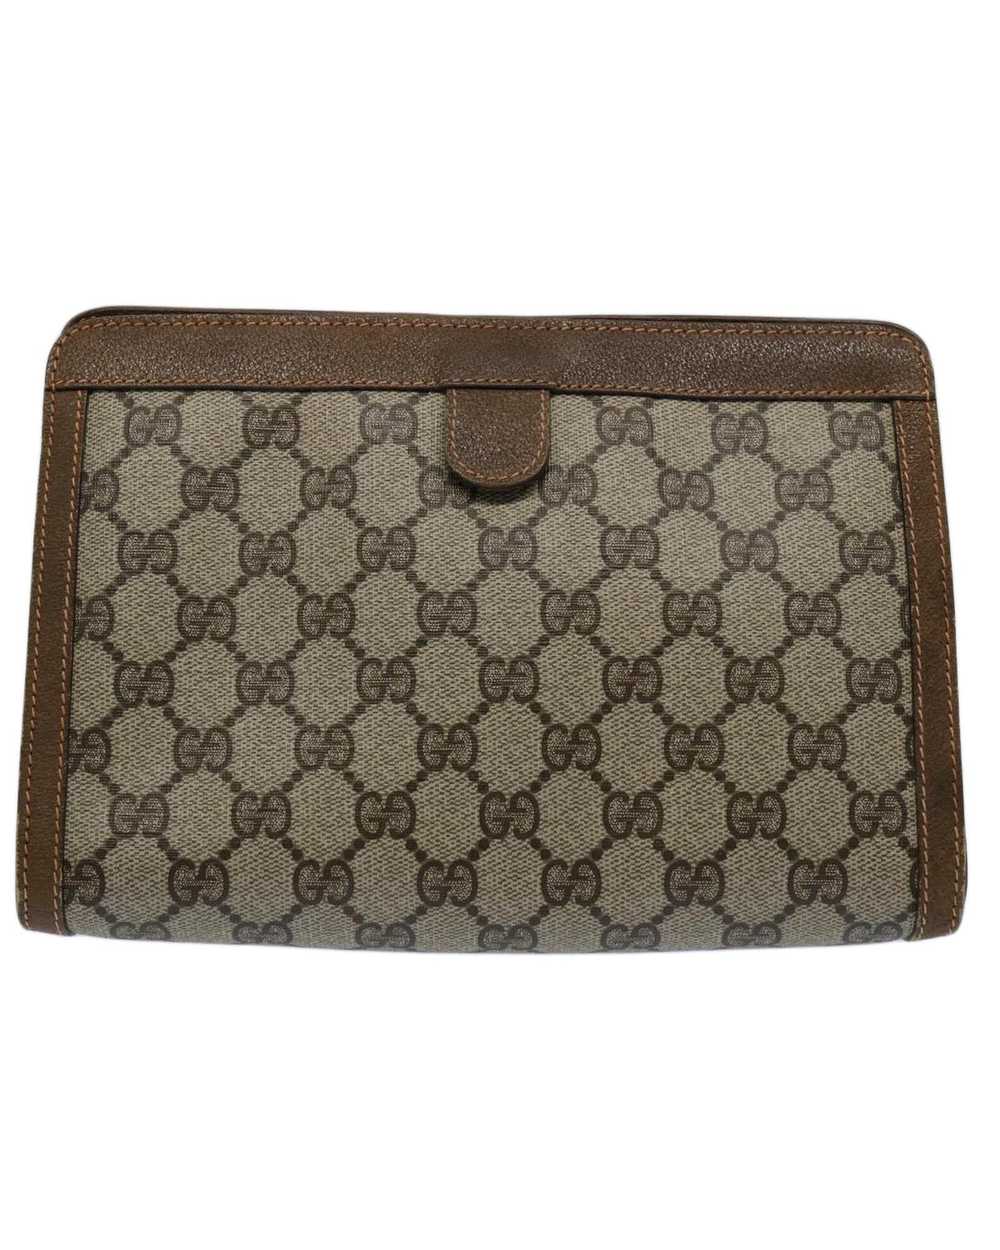 Gucci GG Supreme Web Sherry Line Clutch Bag with … - image 2